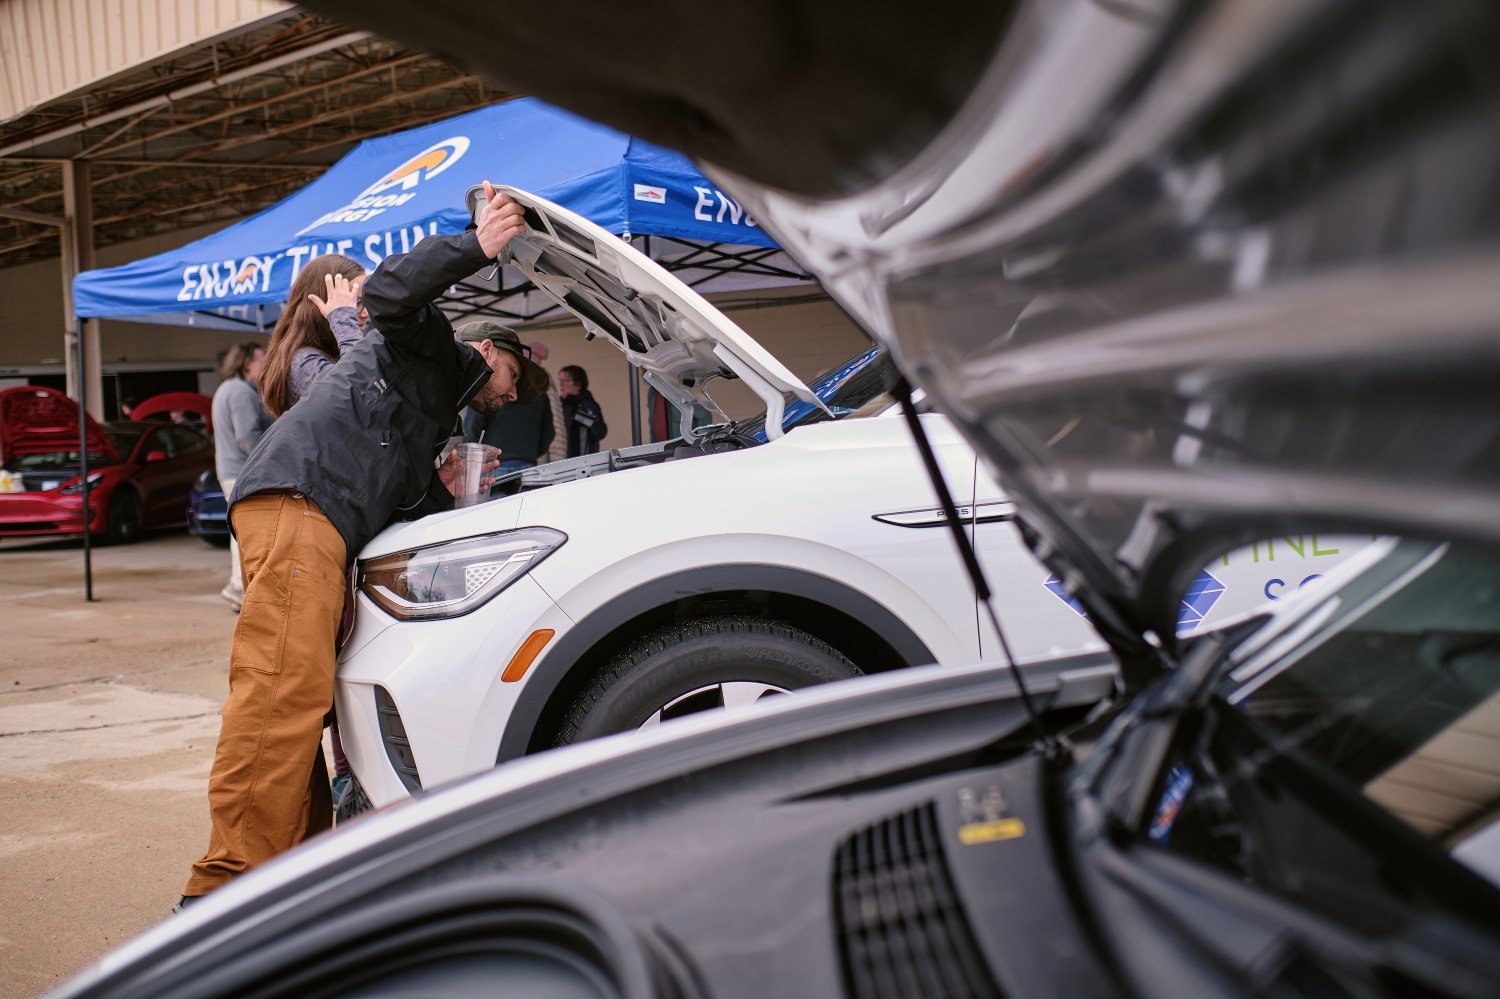  Tour the cars at the Electric Vehicle Expo at the show. 